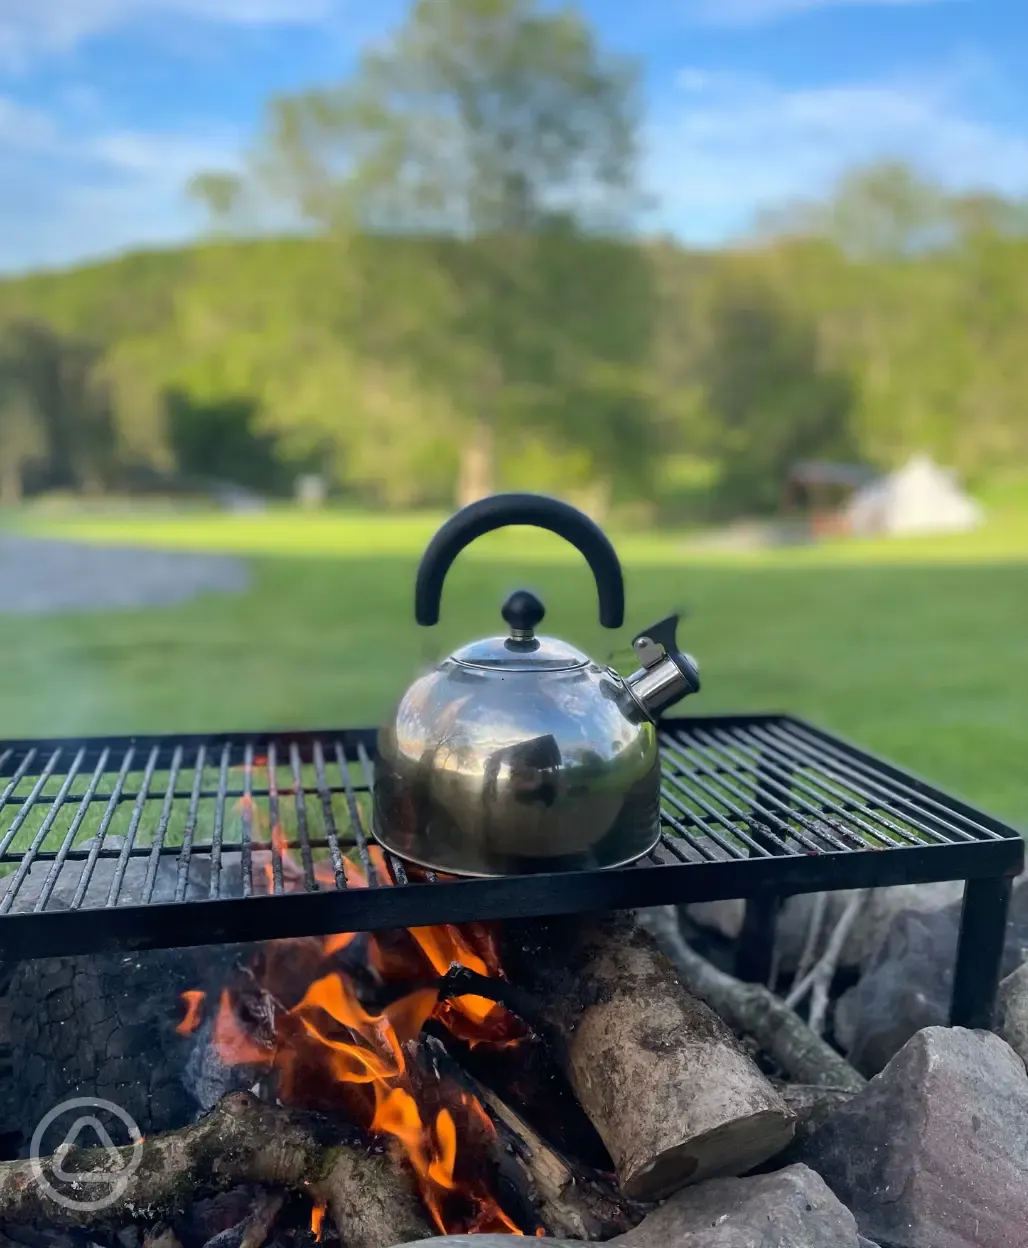 Heating up the kettle on the fire pit